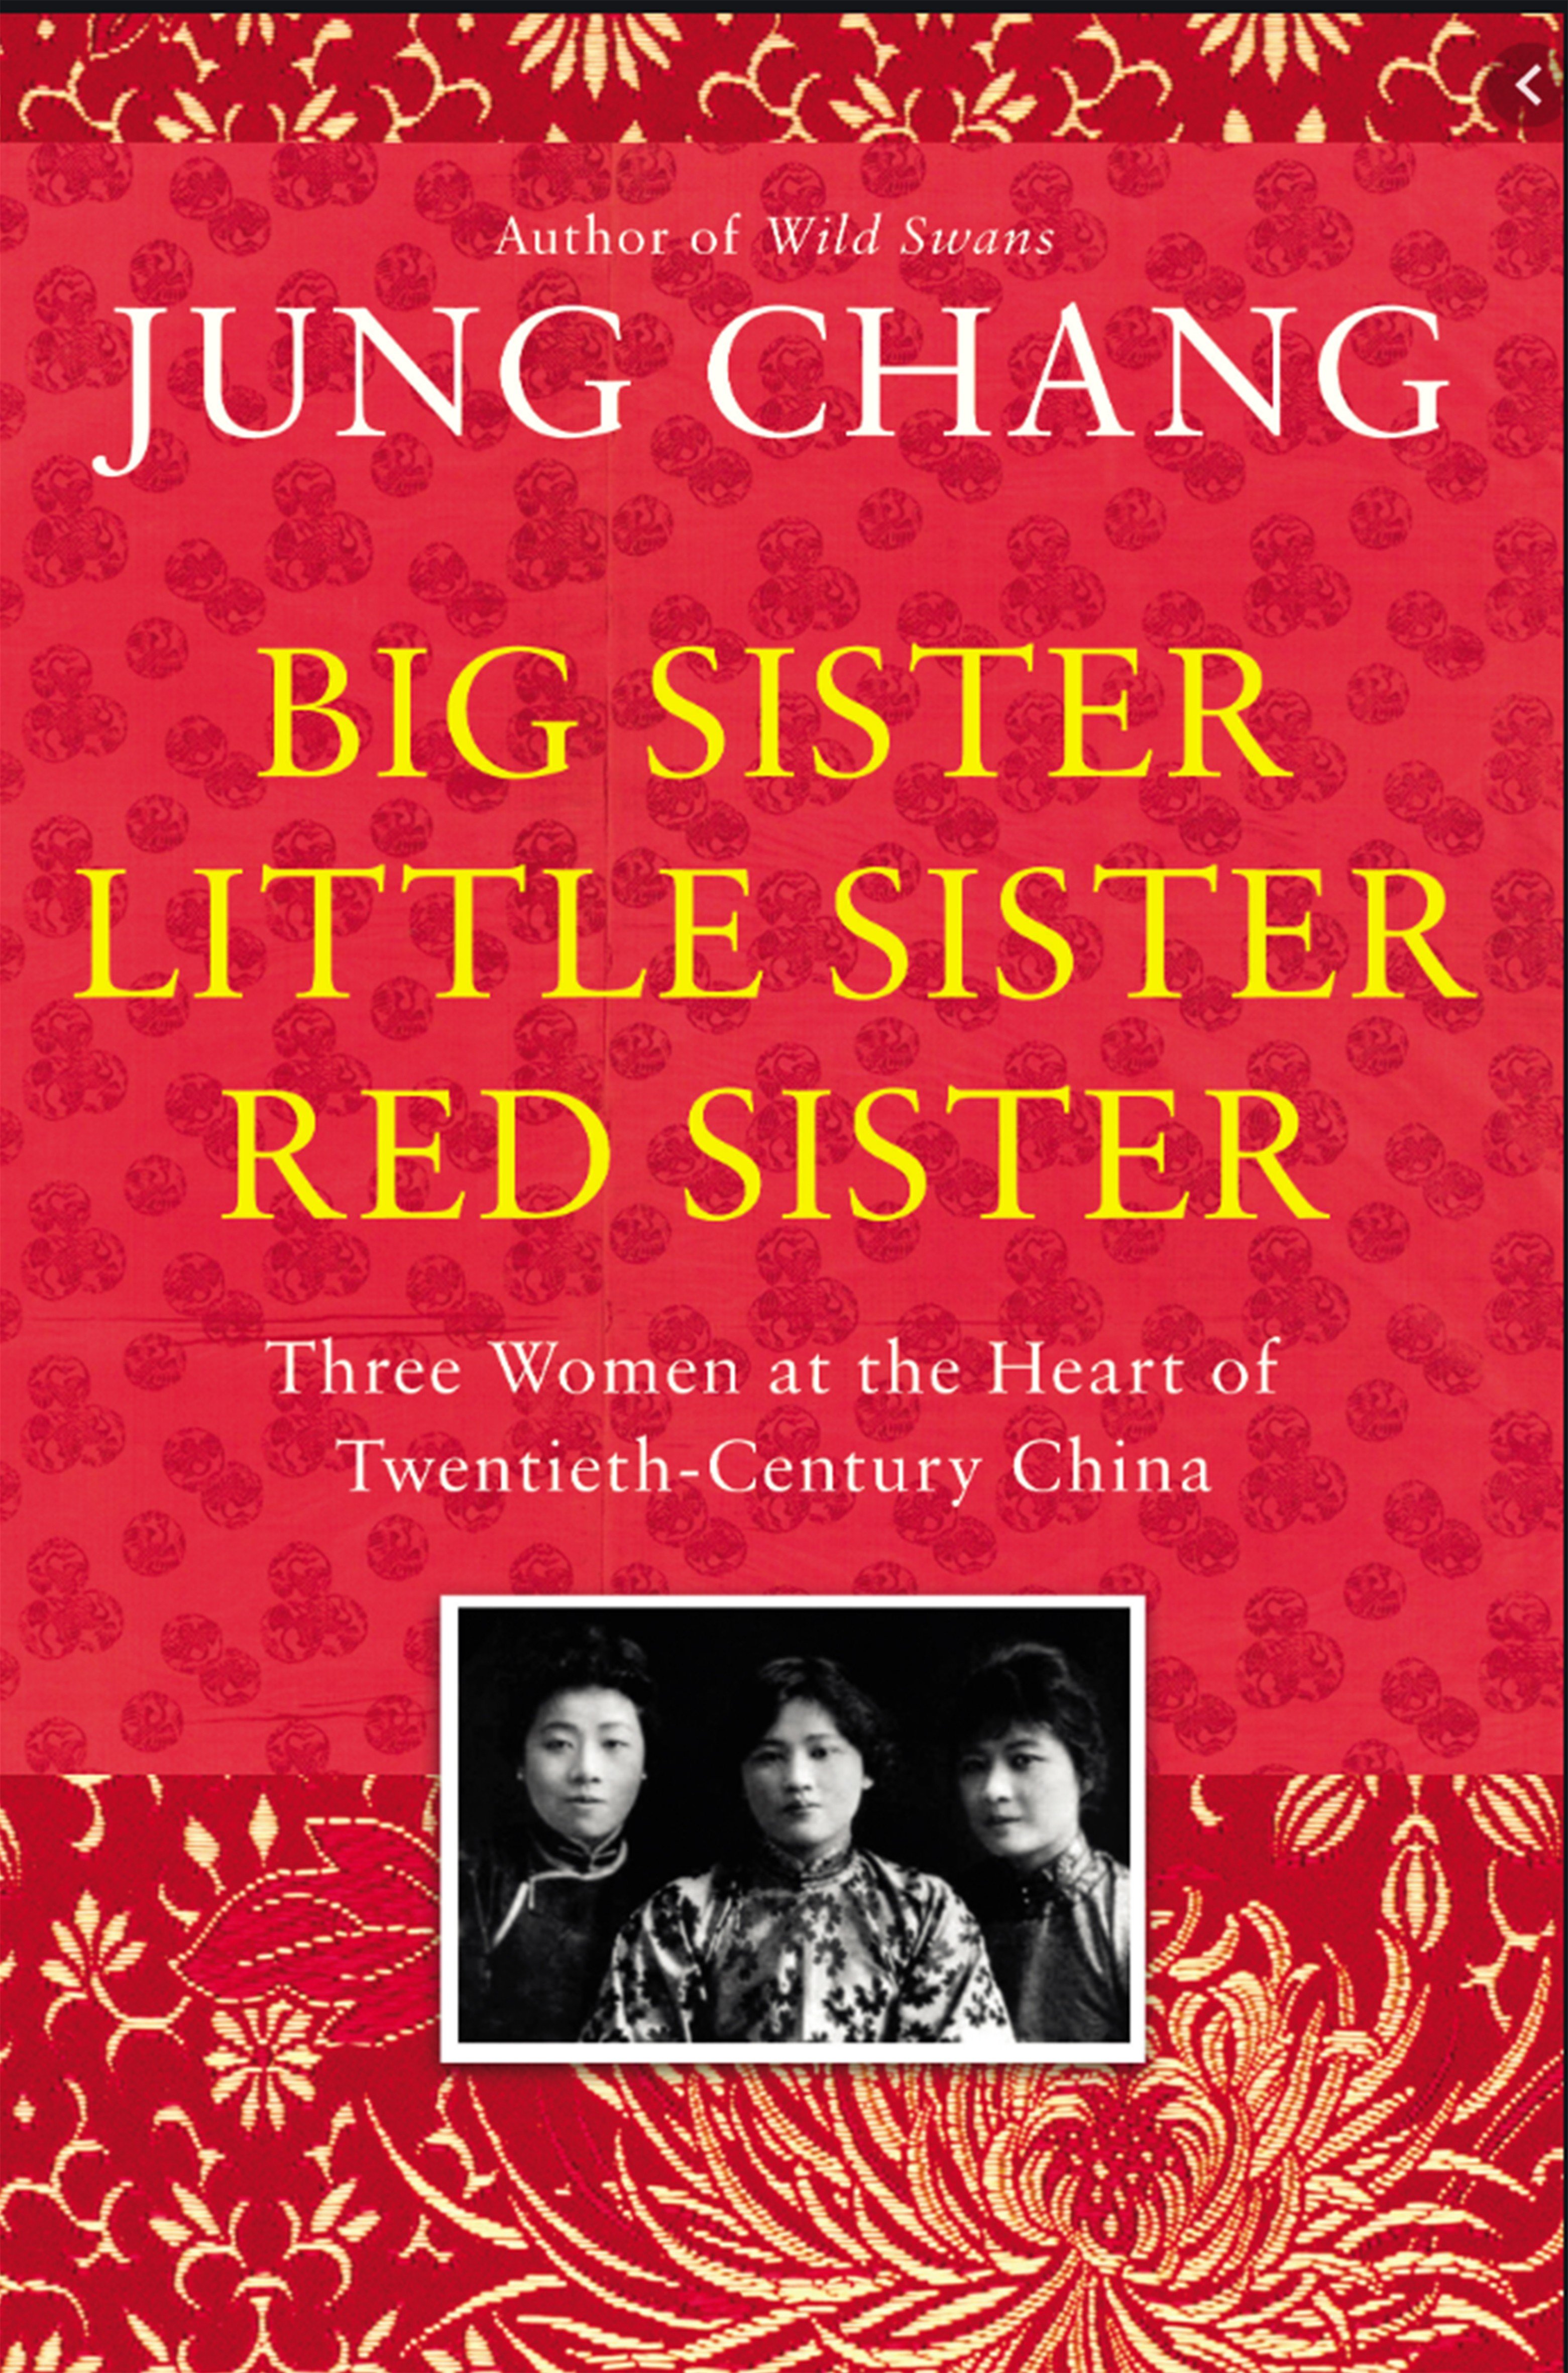 Big Sister, Little Sister, Red Sister, by Jung Chang.